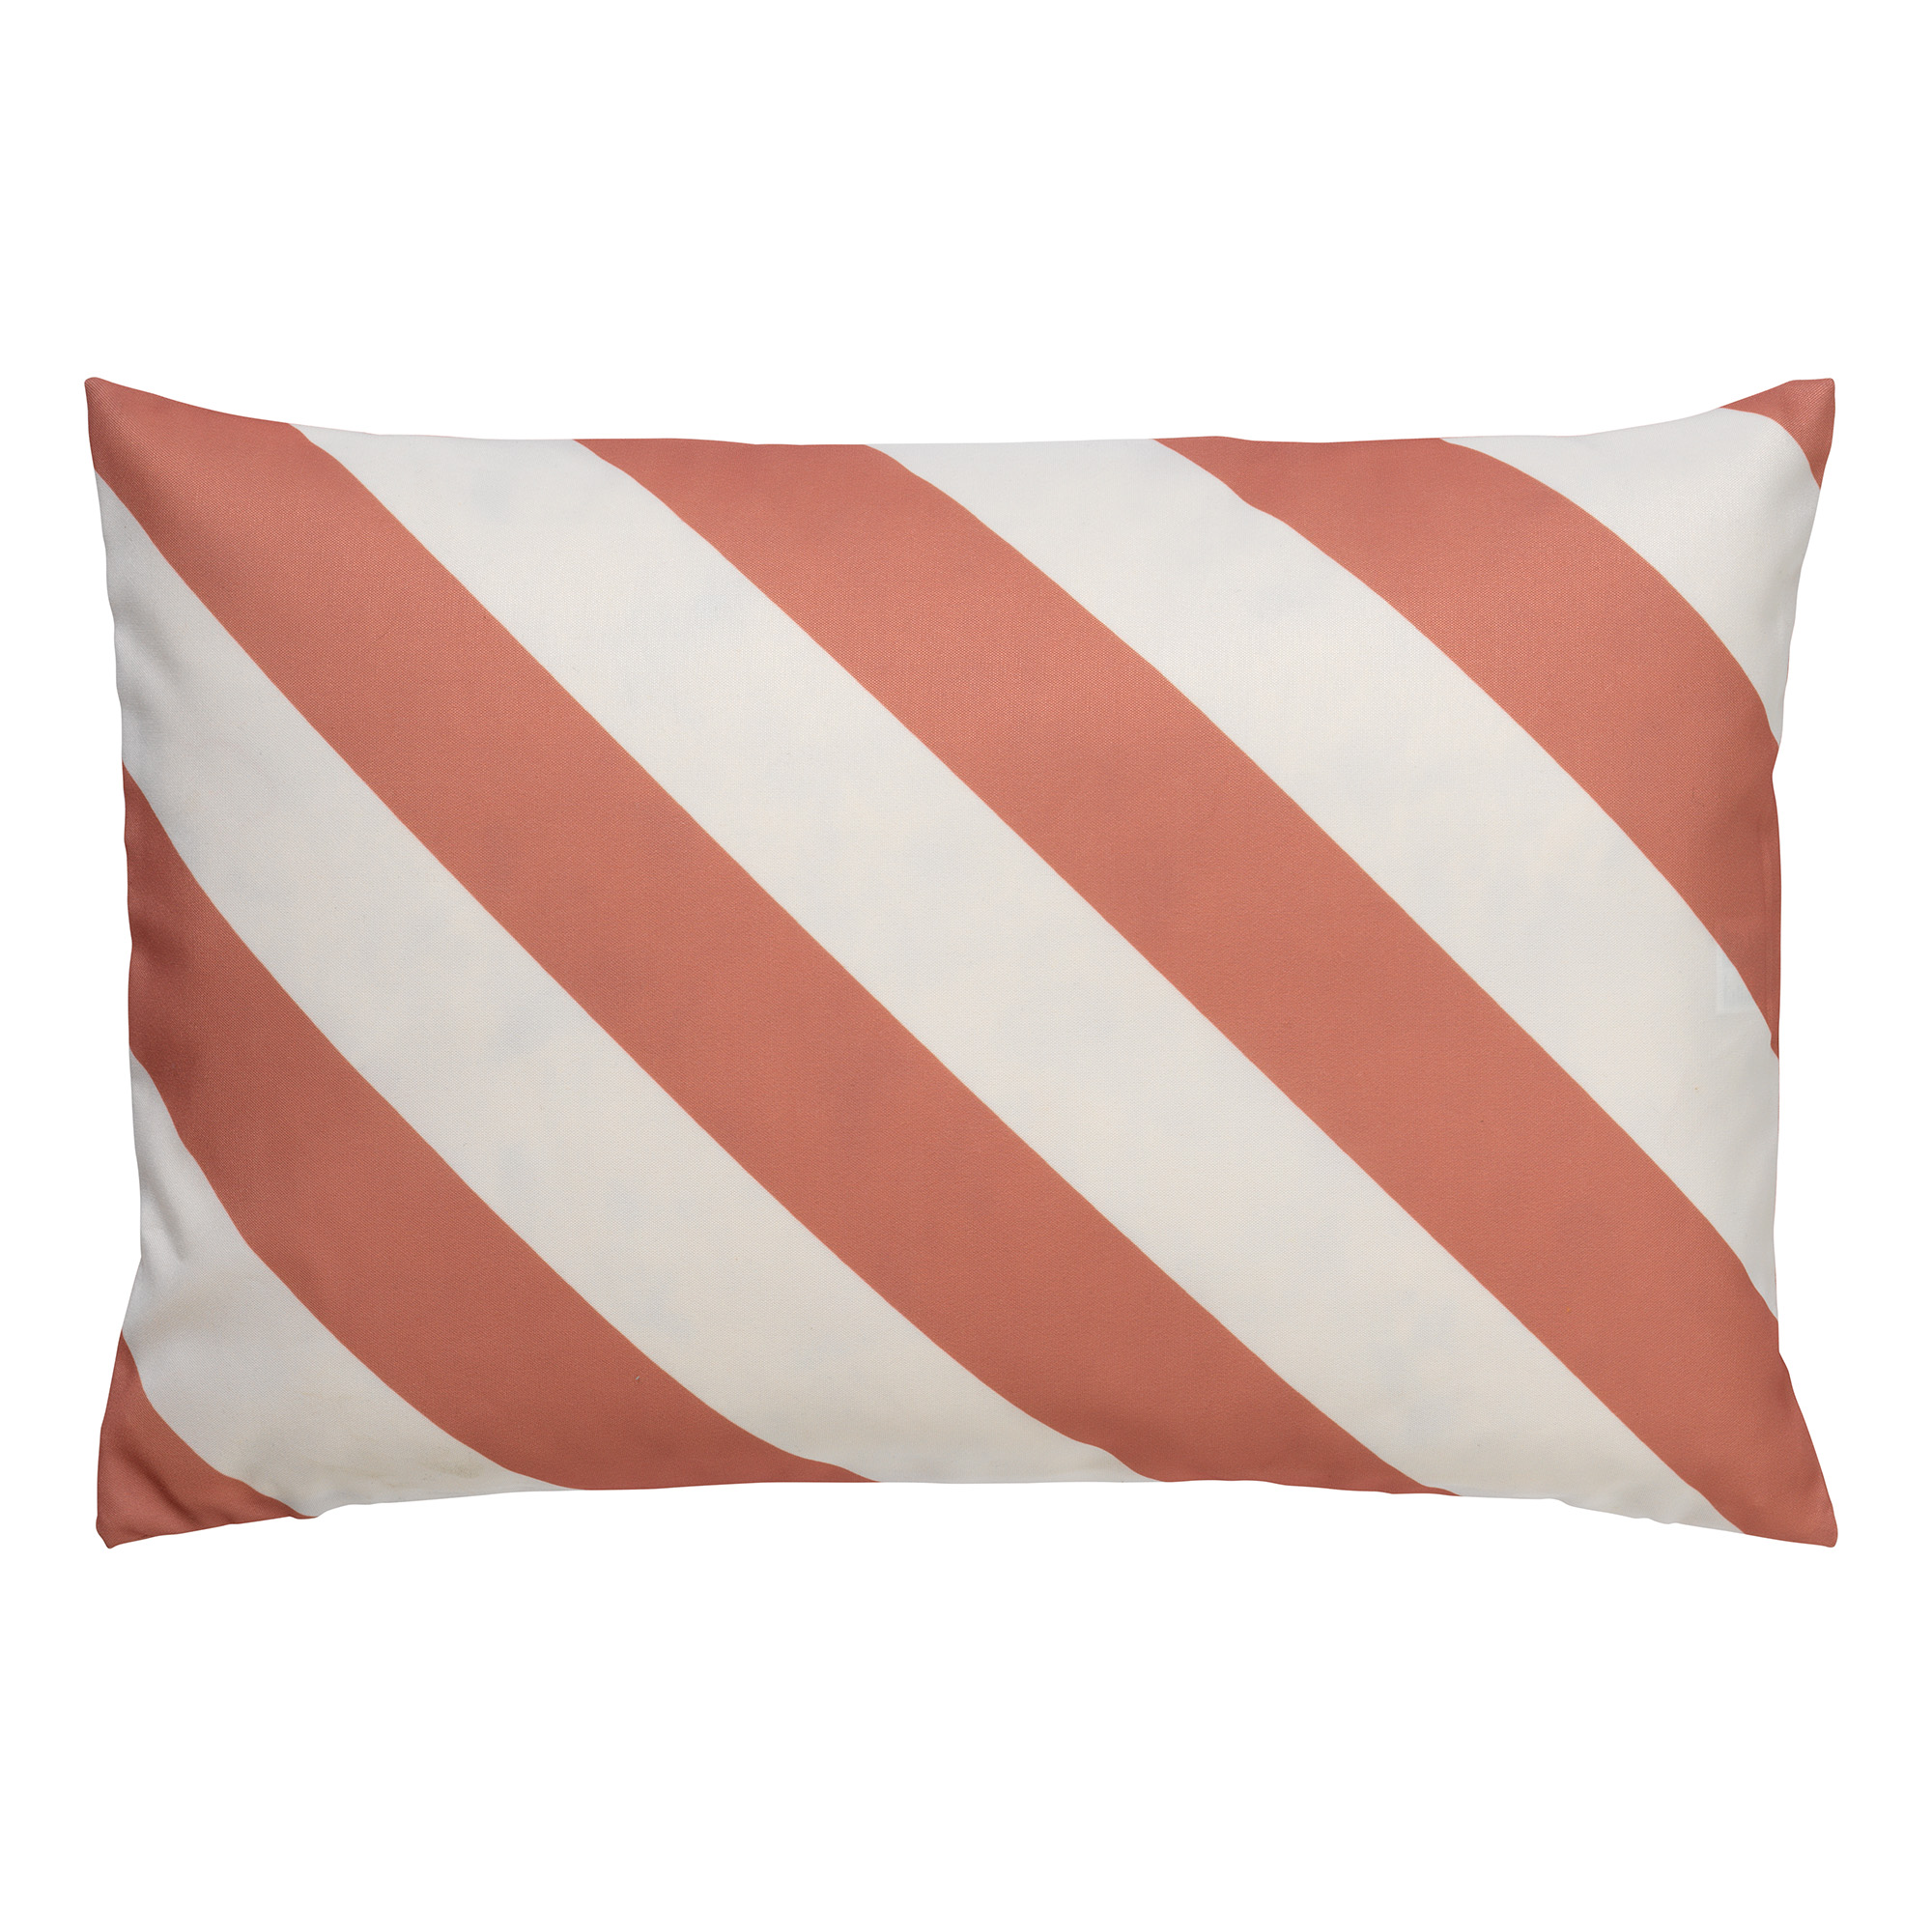 Cushion Sanzeno 40x60 cm Muted Clay - water-repellent and UV-resistant - striped - white and rose